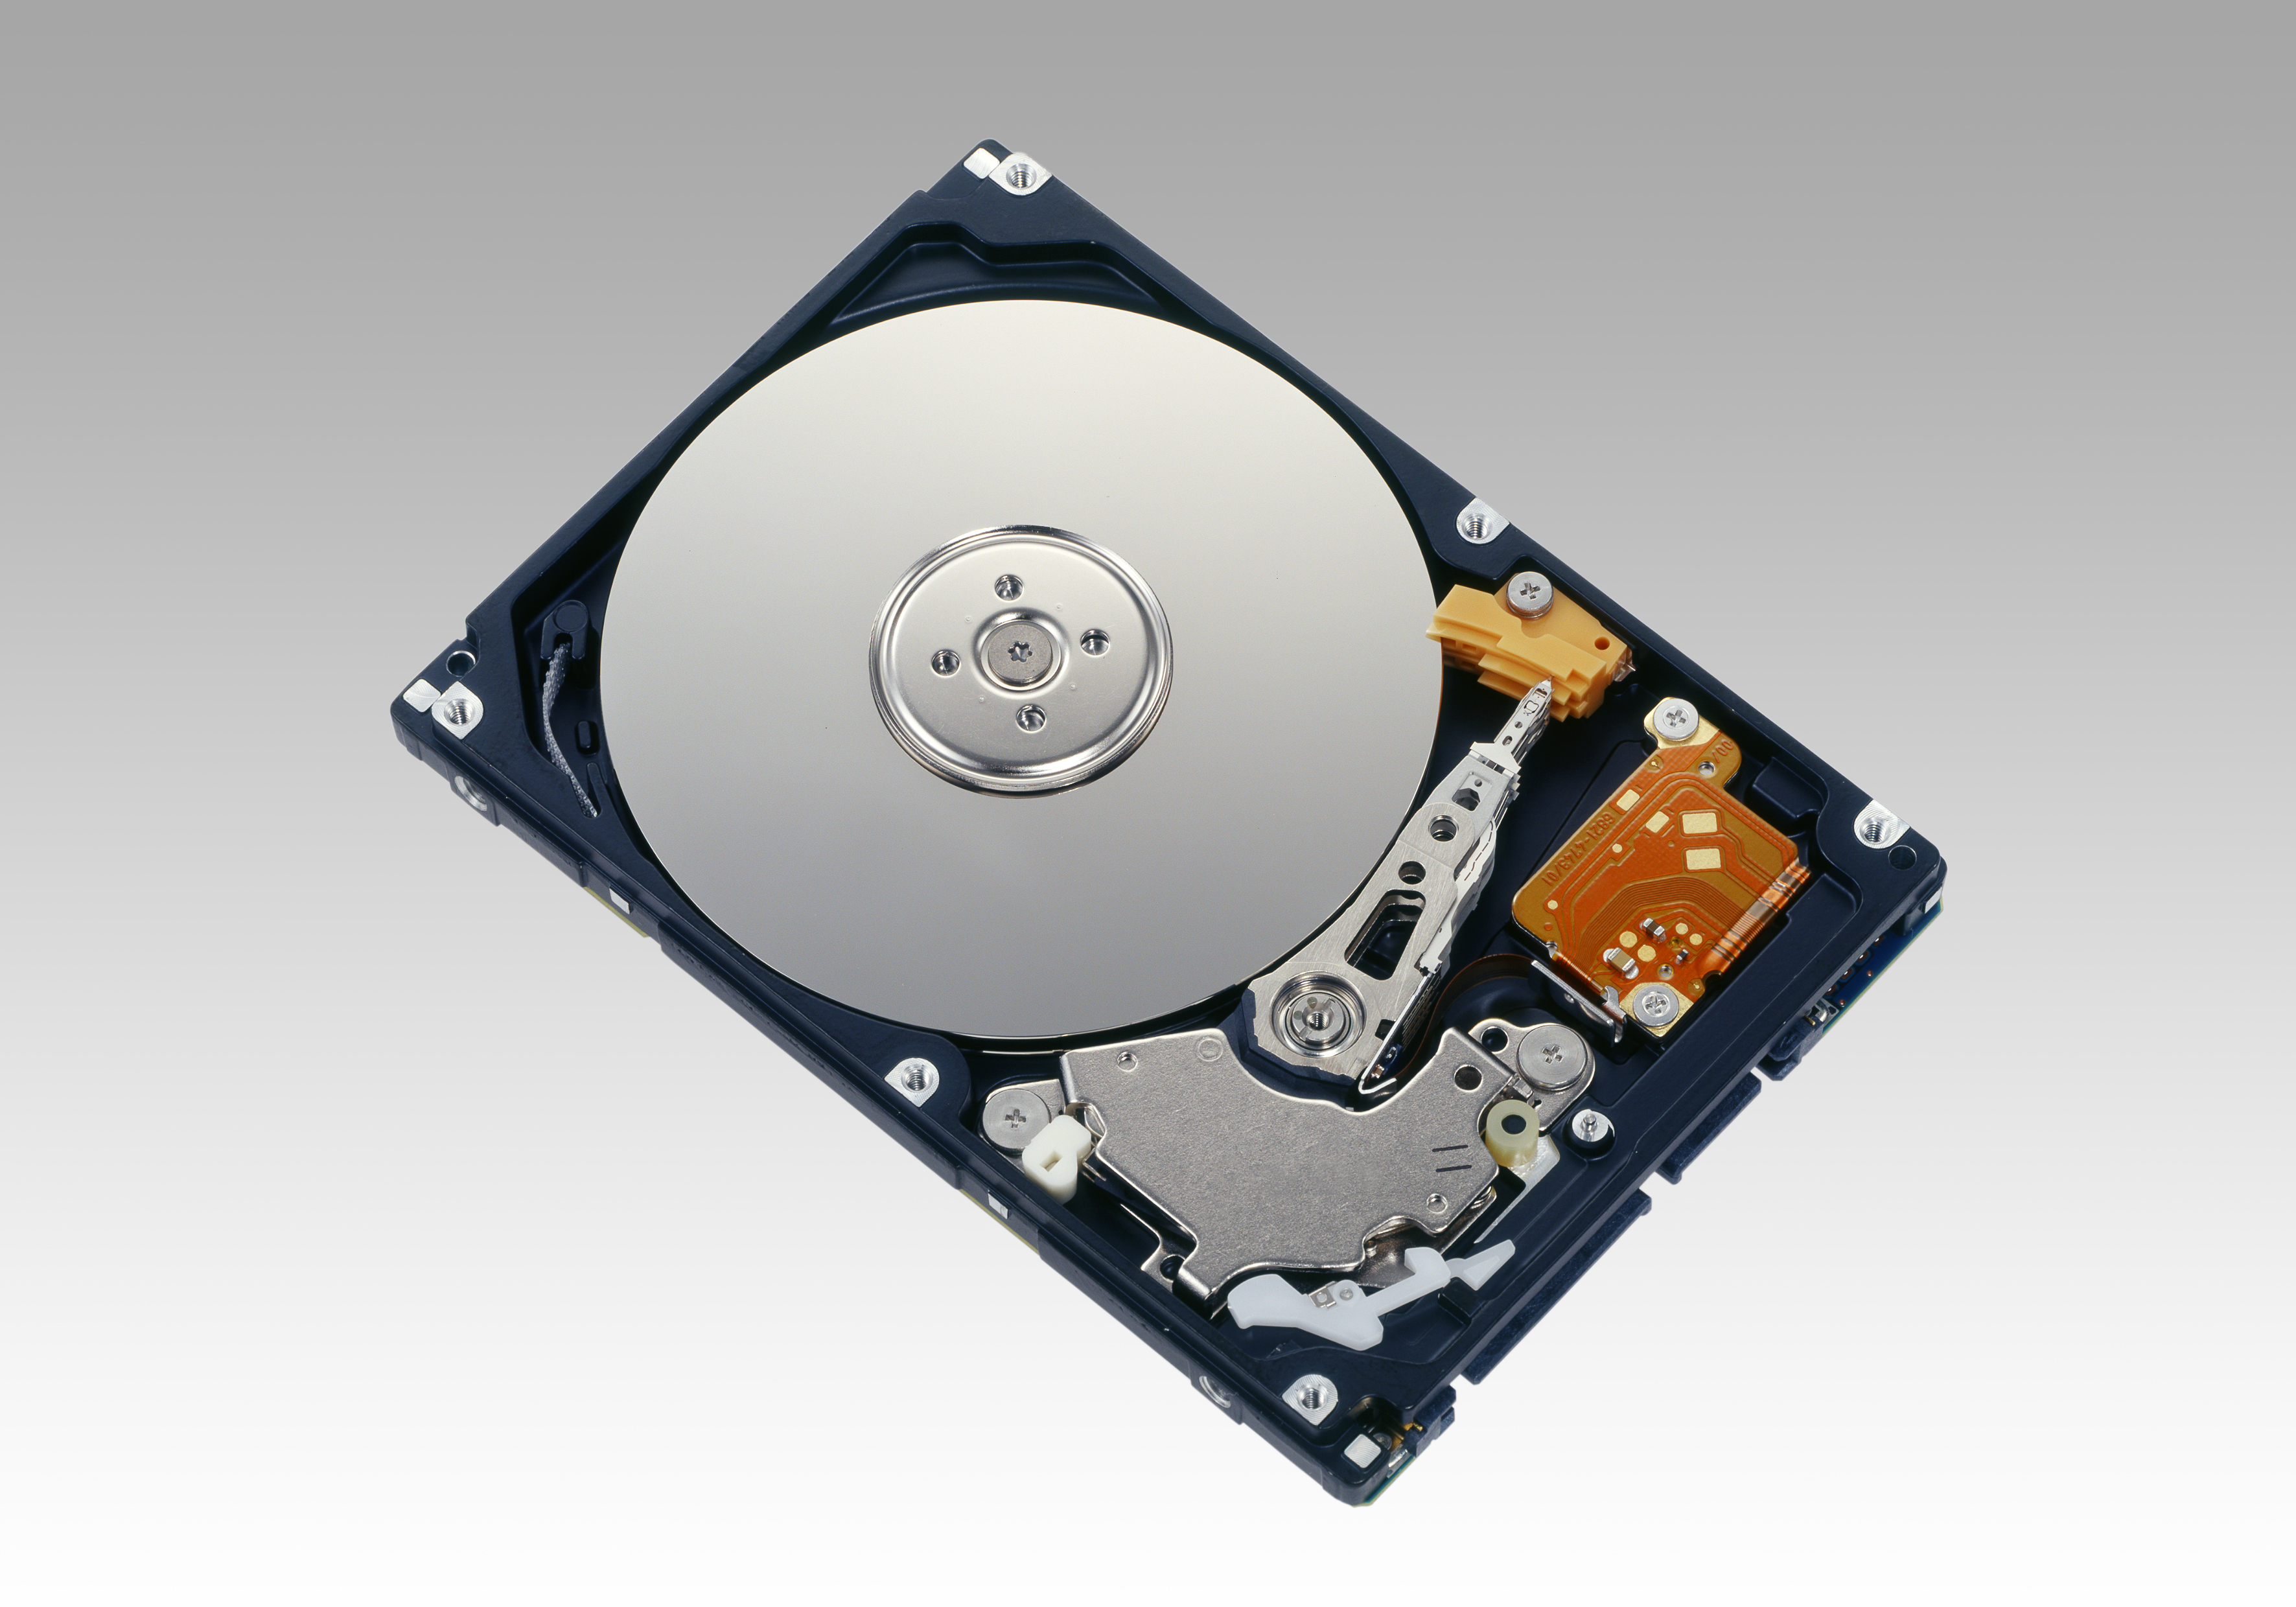 accent metrisk nær ved Fujitsu Introduces its First 2.5" Hard Disk Drives Featuring Perpendicular  Magnetic Recording - Fujitsu Global